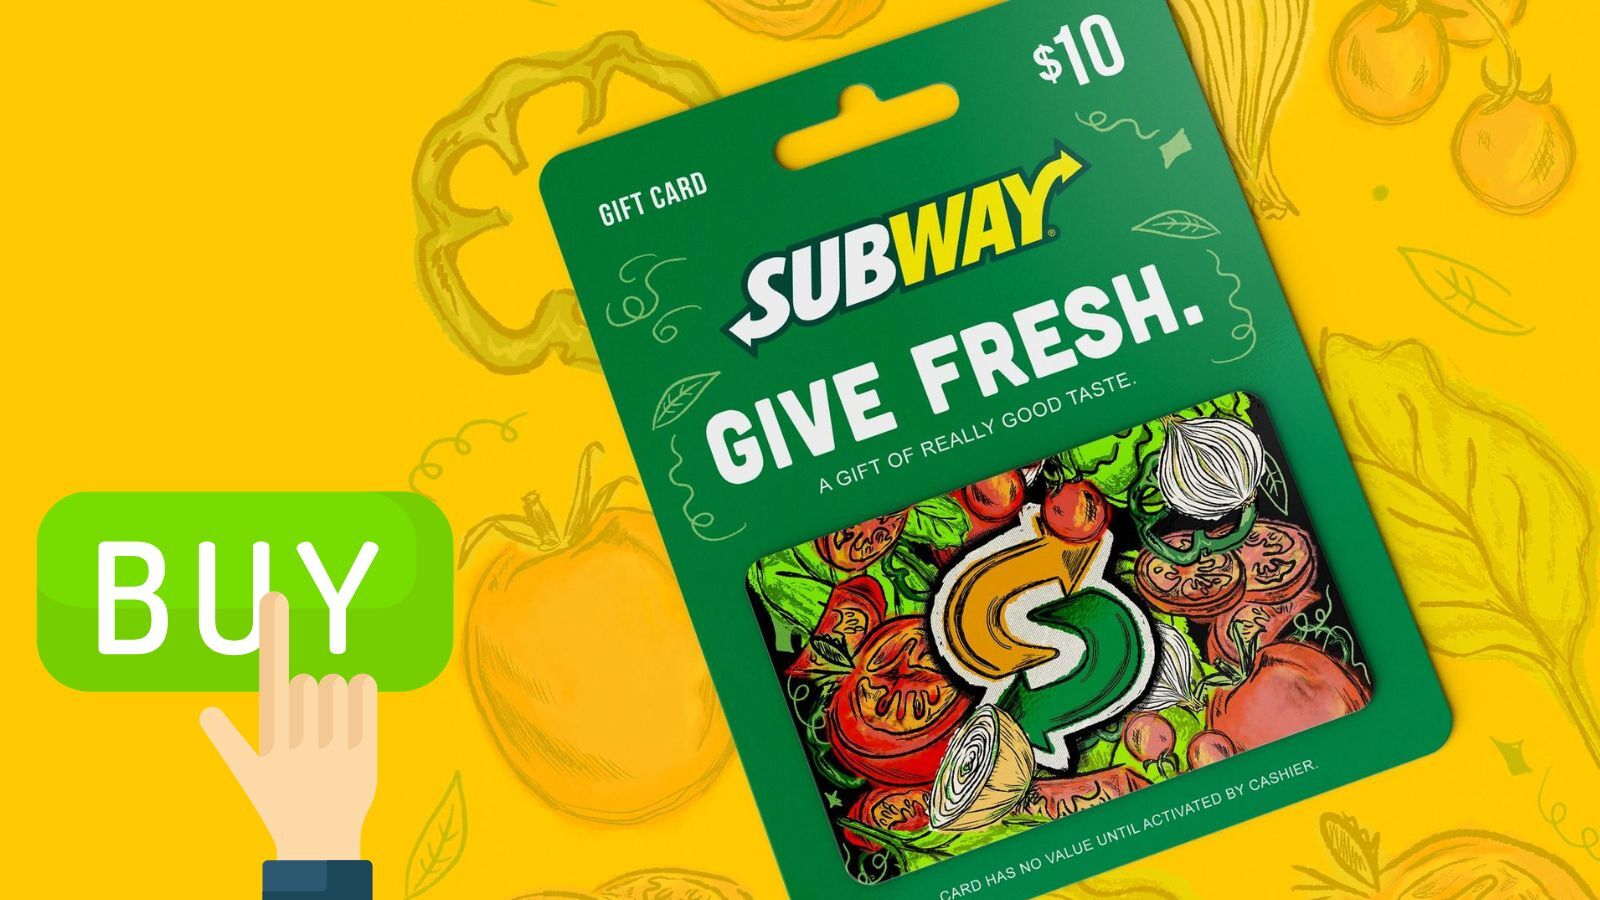 Where Can I Buy Subway Gift Cards? (A Complete List)